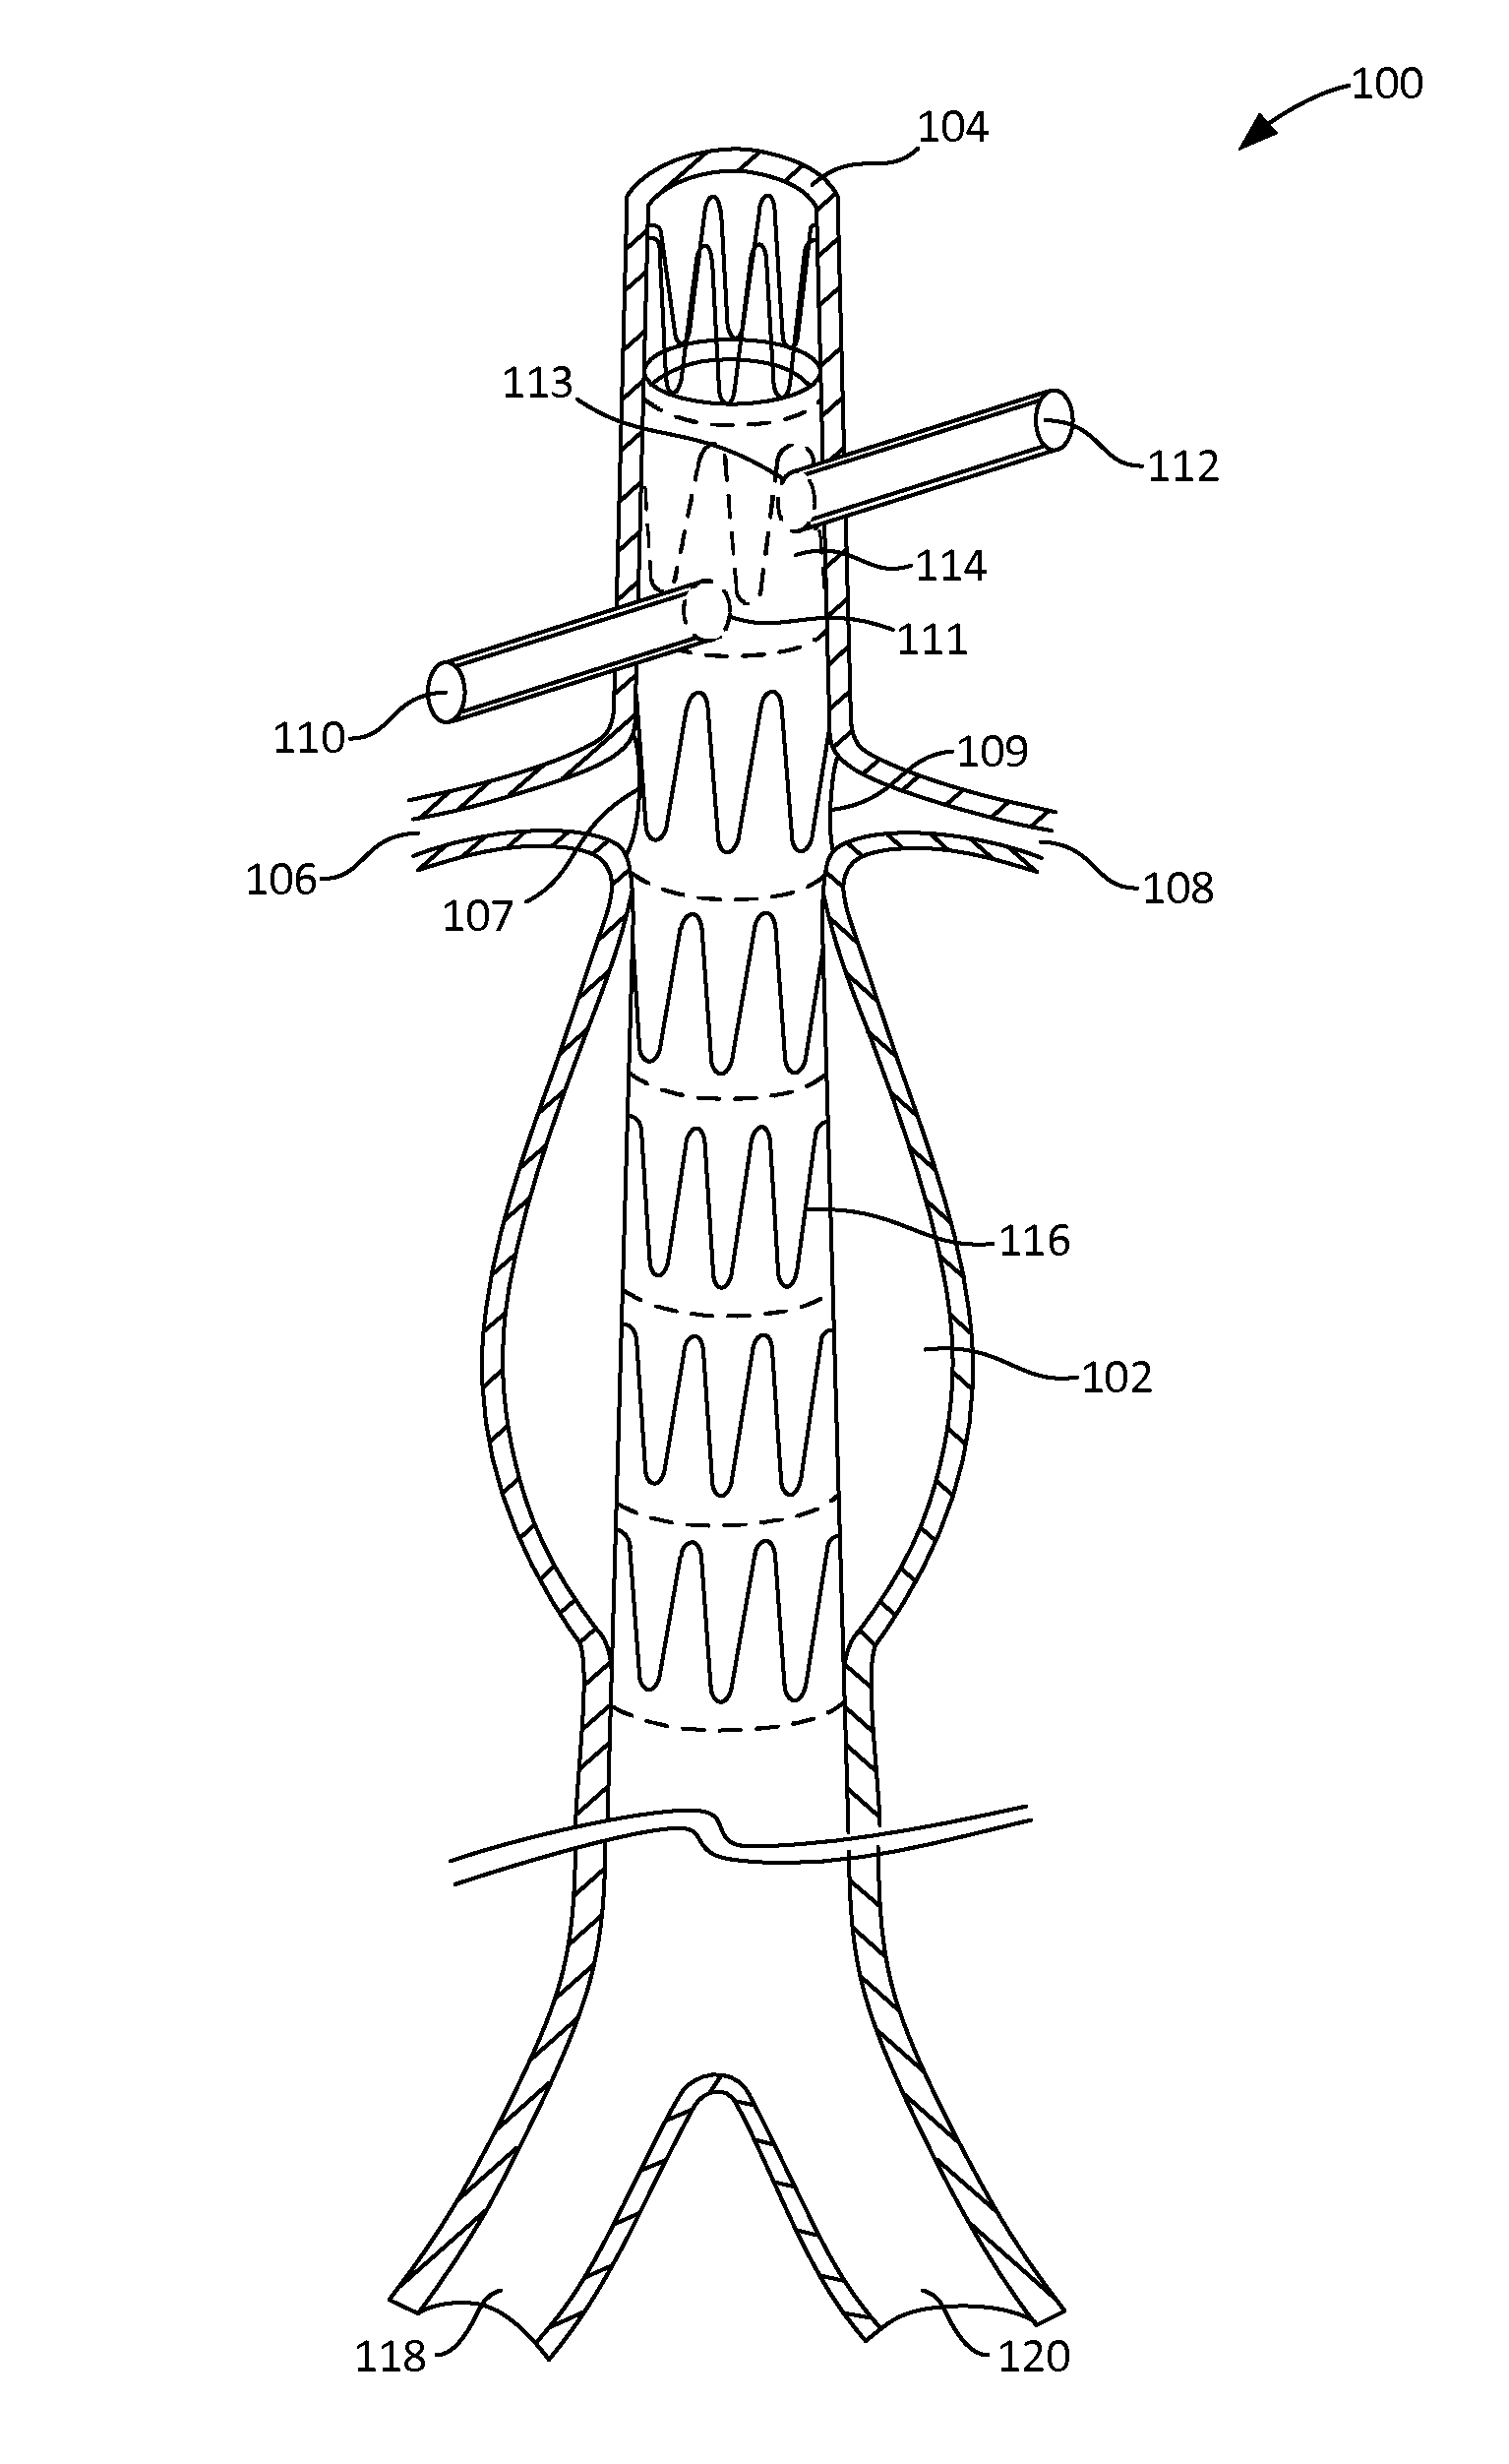 Fenestration template for endovascular repair of aortic aneurysms